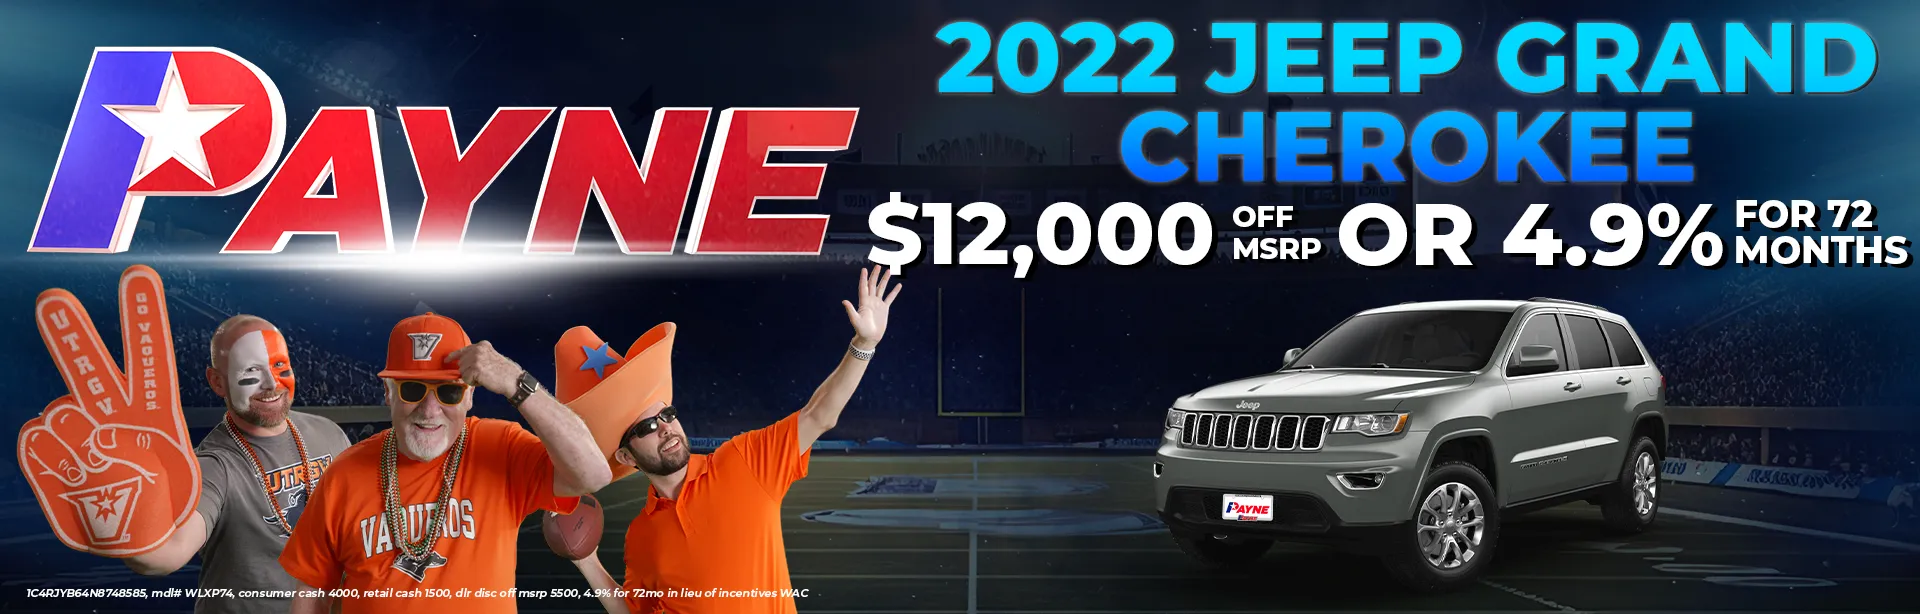 $12,000 off MSRP or 4.9% on 2022 Jeep Grand Cherokee